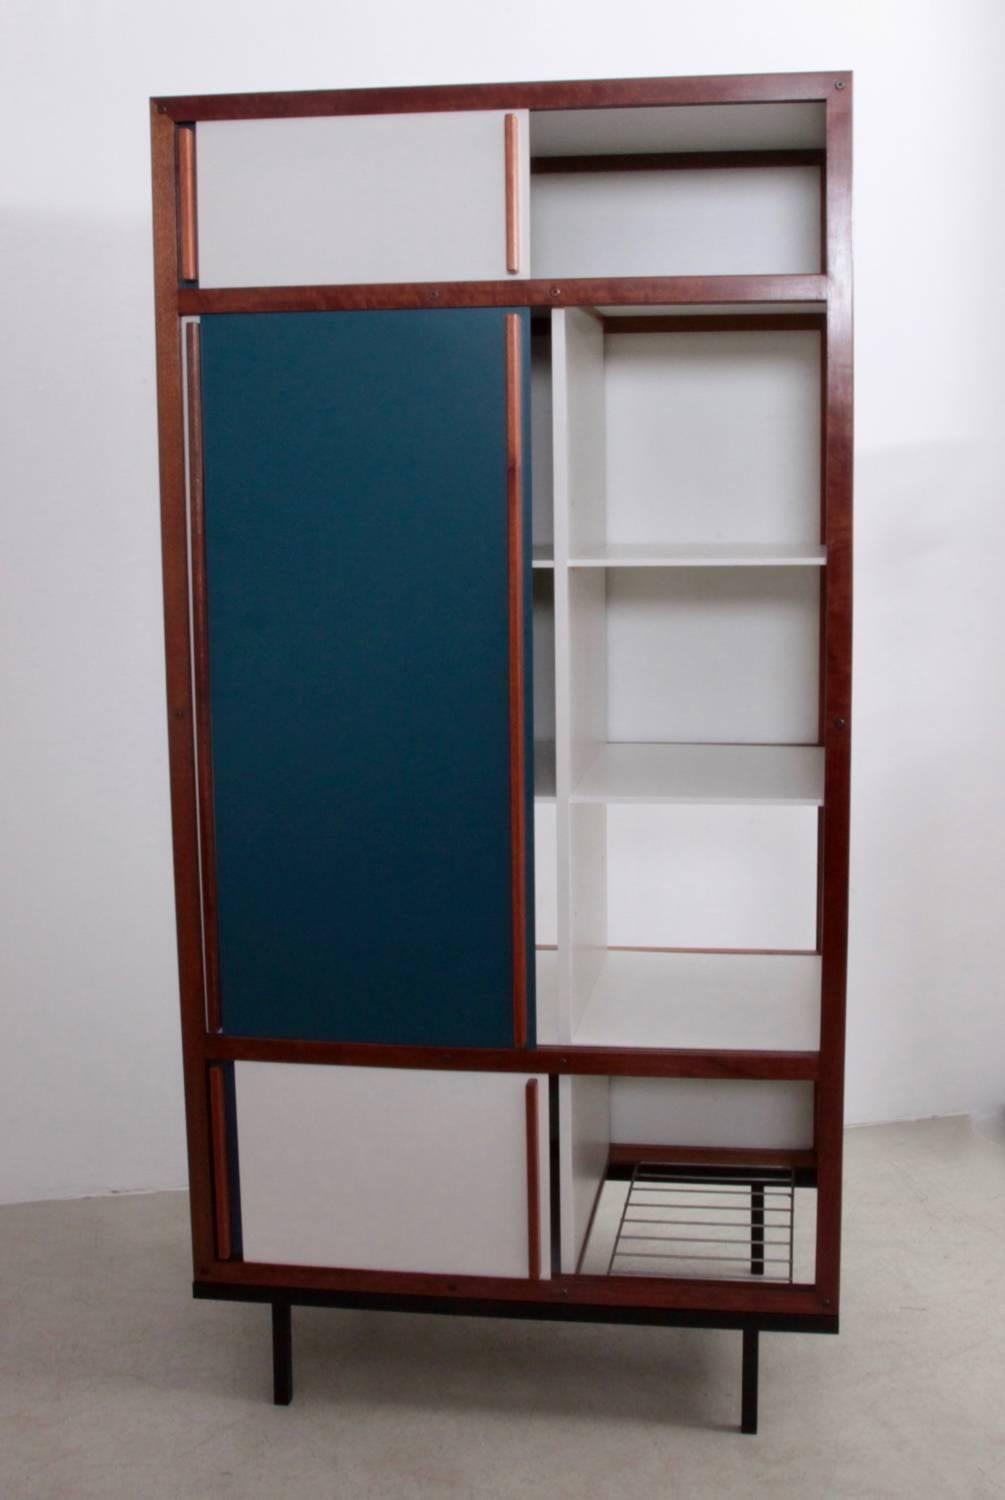 Cabinets, armoires or wardrobe by the most important Lyonaise designer of the 1930s-1950s, Andre Sornay. The wood front panels form a dynamic geometric abstraction in white, cream and petrol blue which is framed by the main structure in